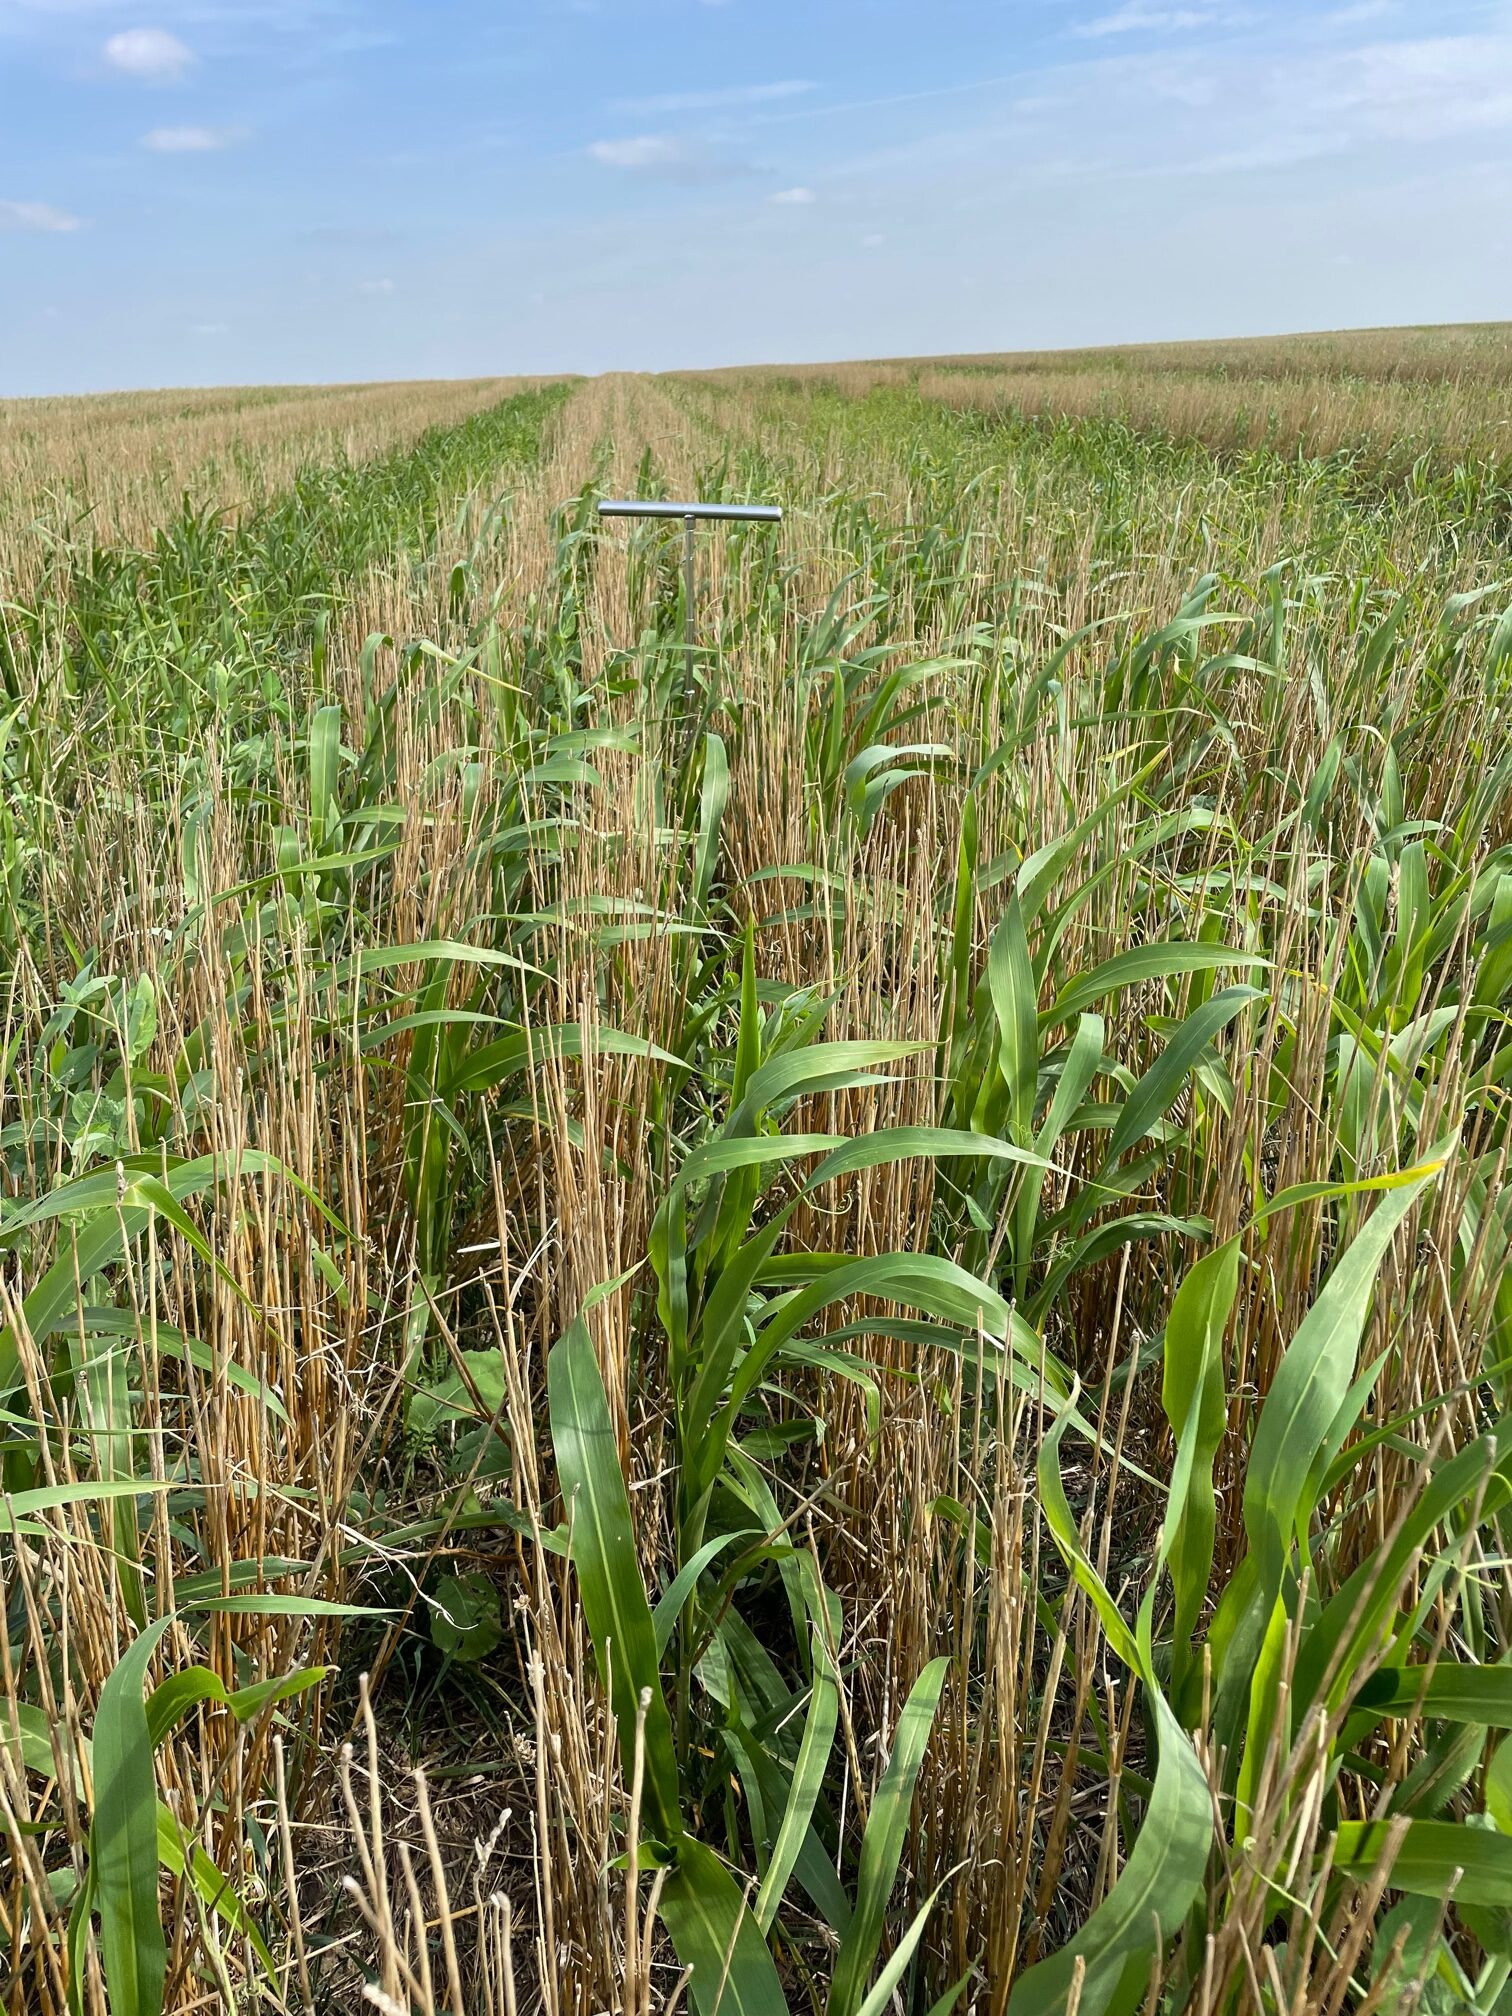 A cover crop struggles to grow in dry conditions between narrow rows of tall wheat stubble. A soil probe stands in the ground.